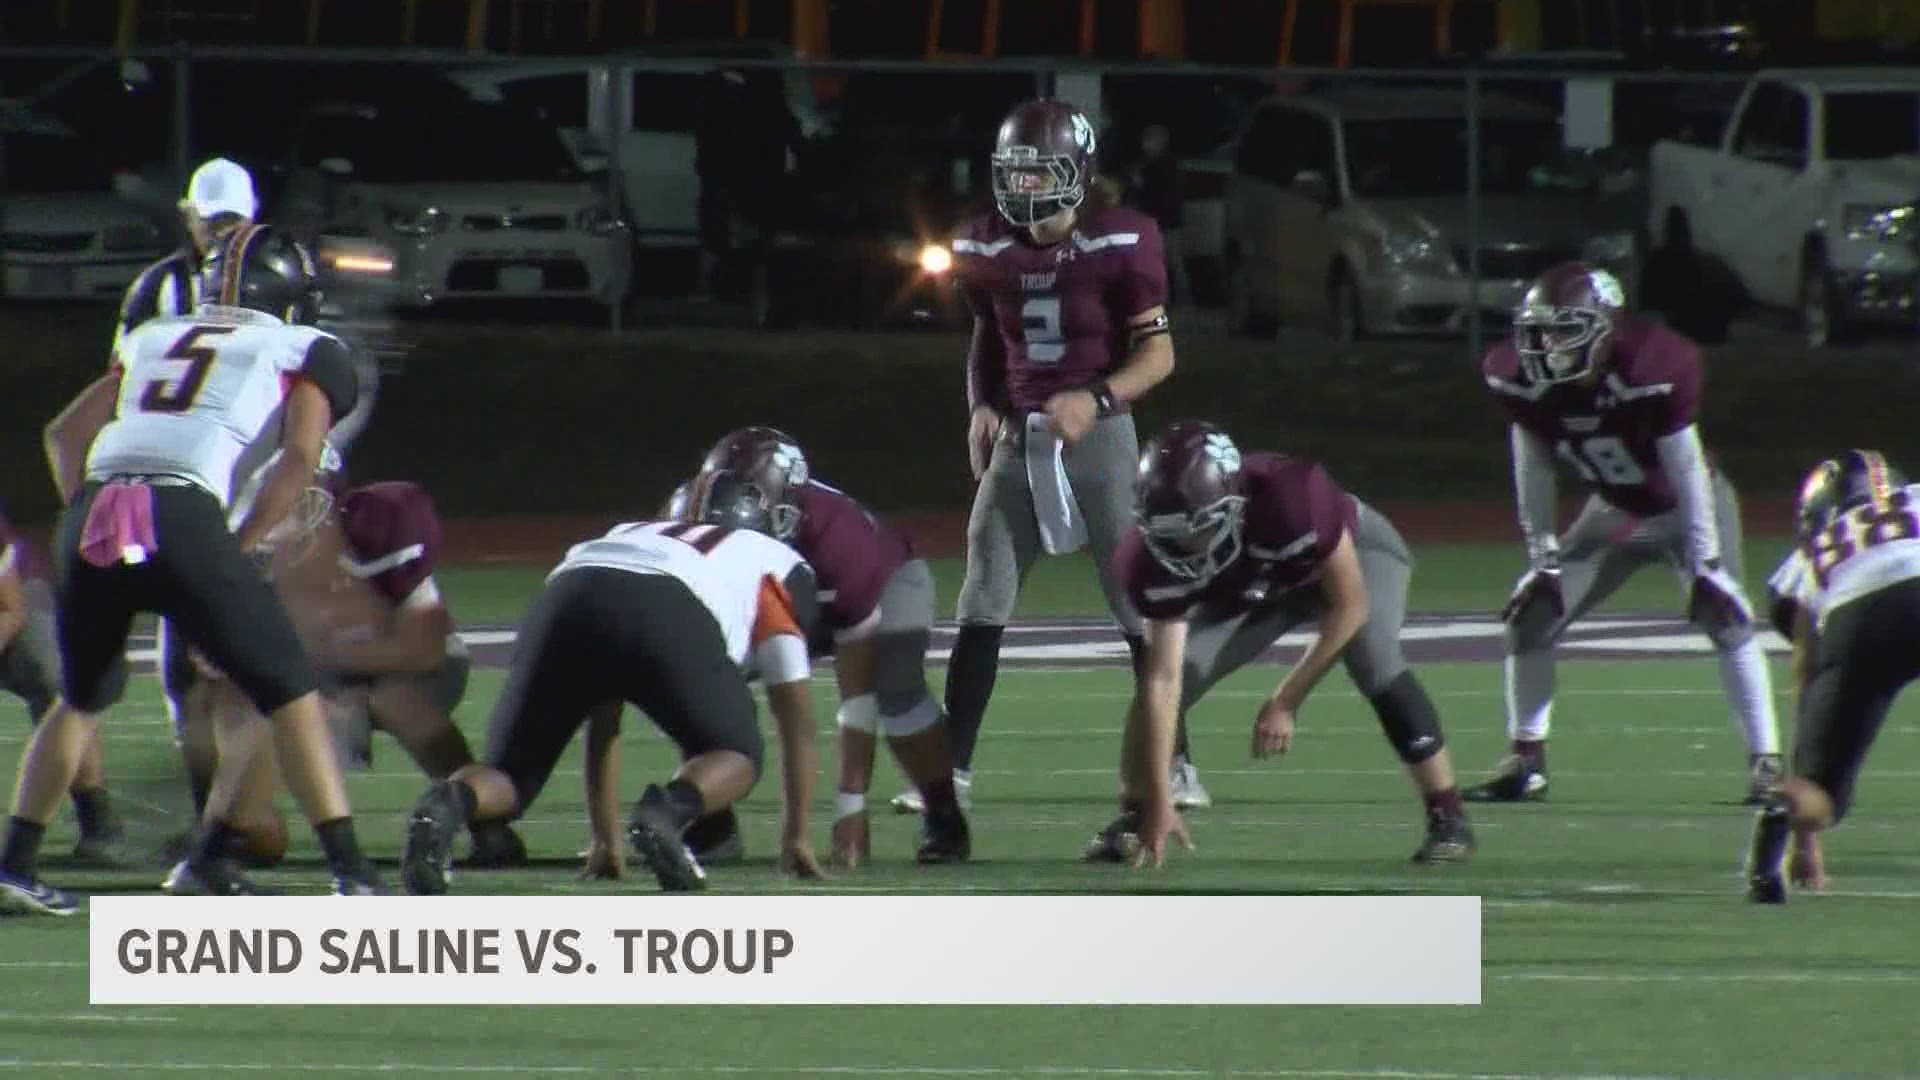 Troup came away with the win, topping Grand Saline 47-0.